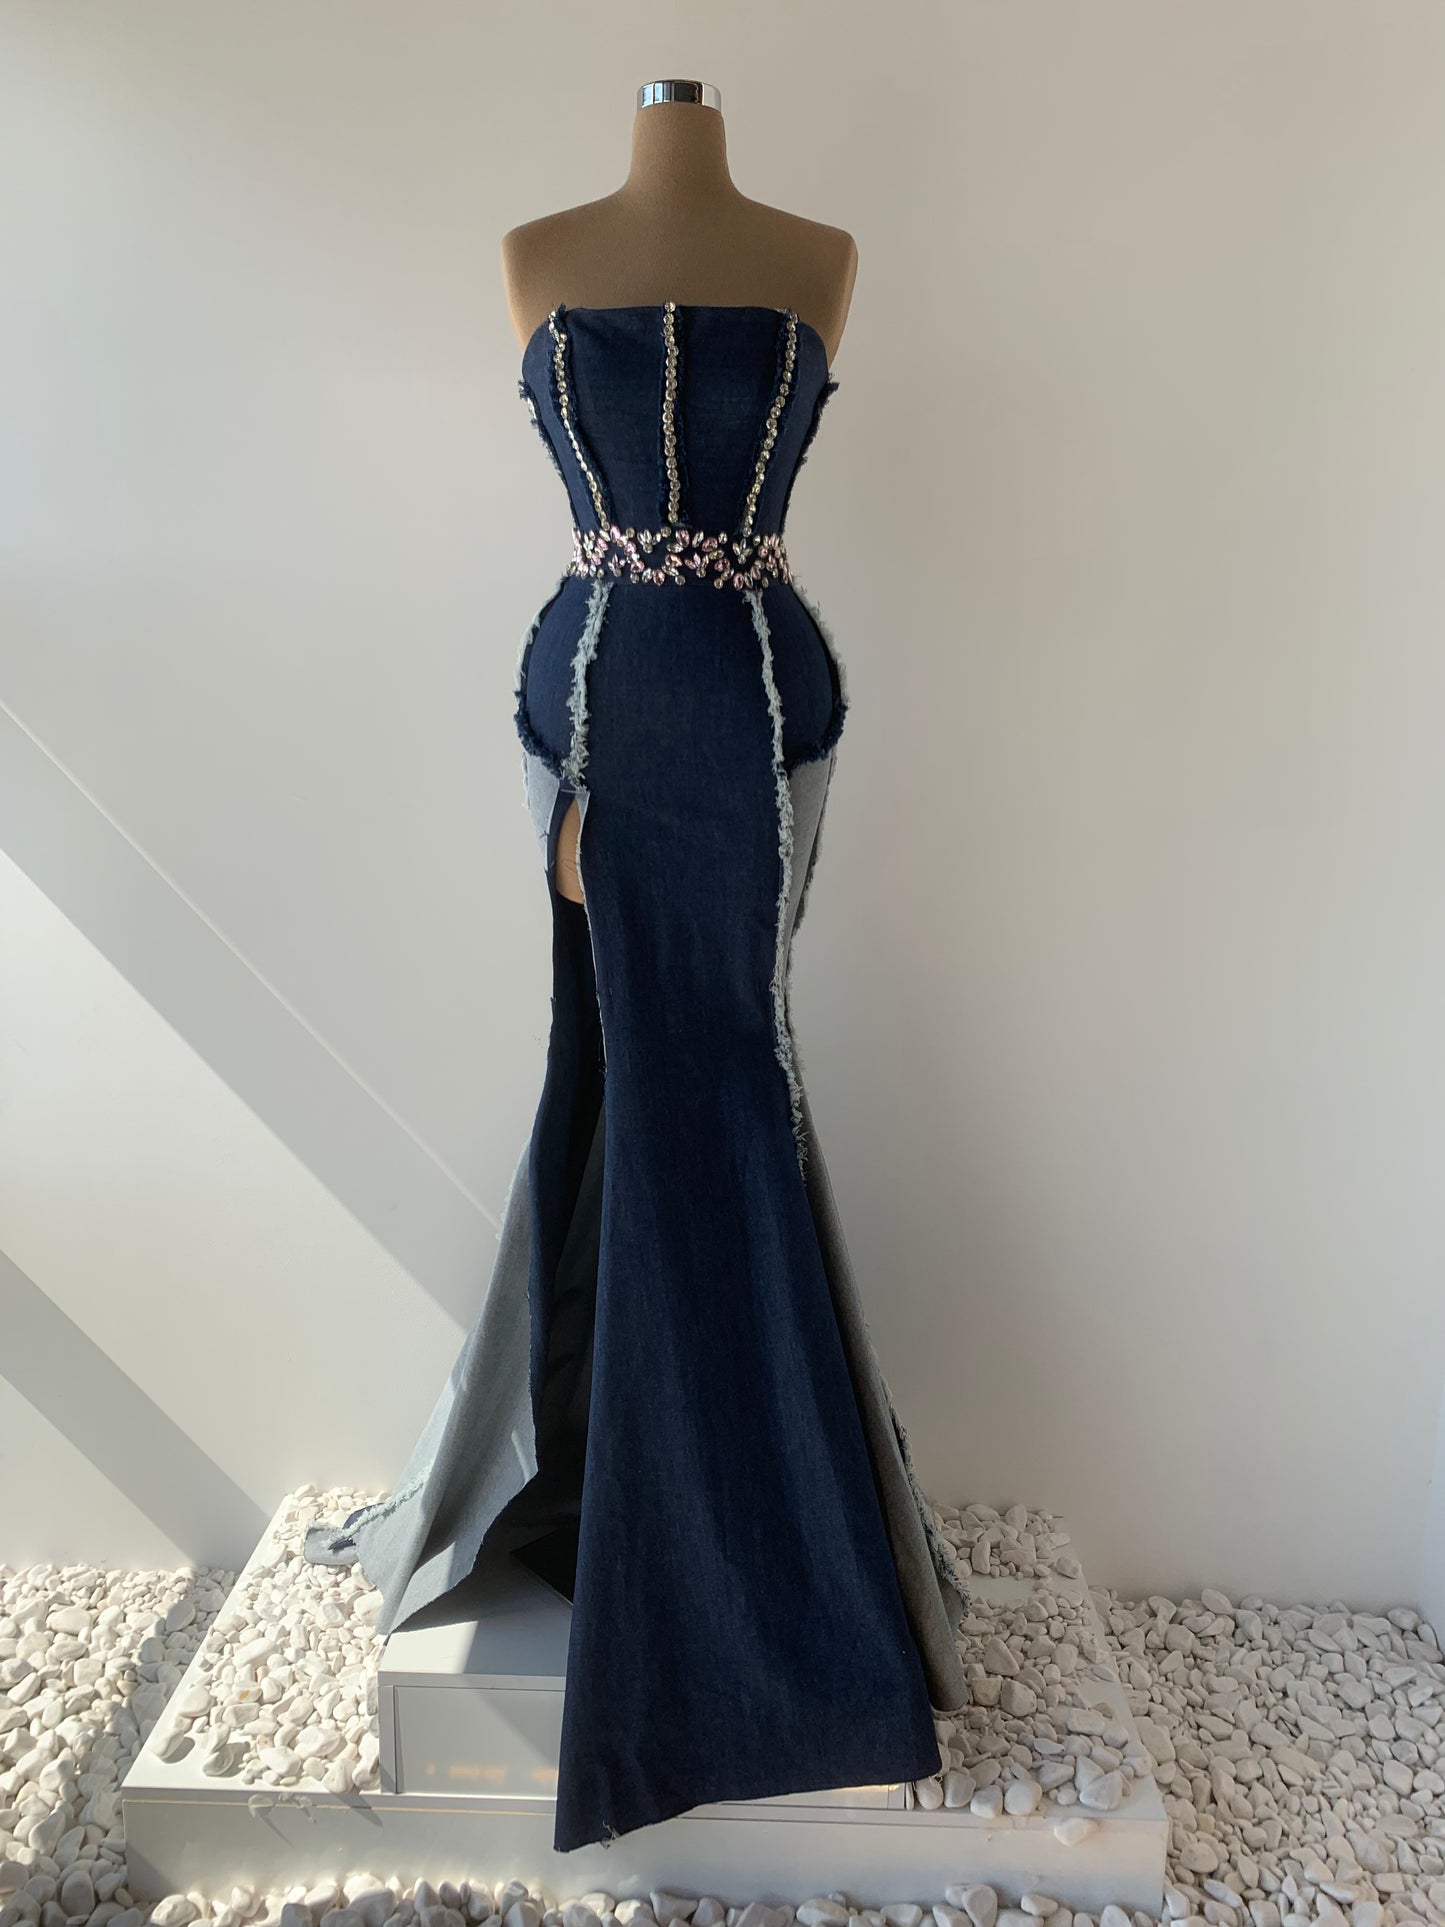 Ripped Denim Gown